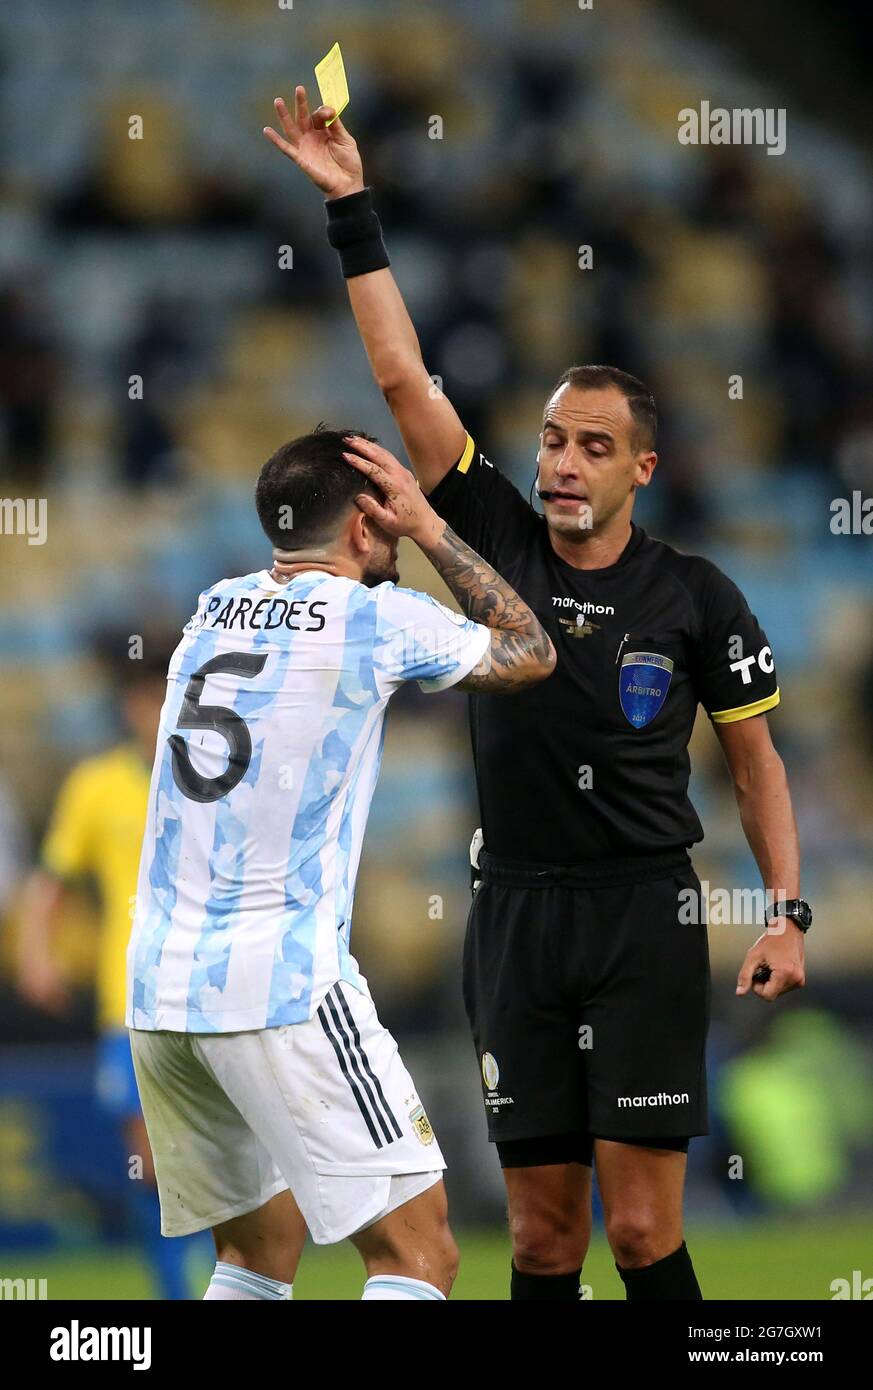 RIO DE JANEIRO, BRAZIL - JULY 10: Leandro Paredes of Argentina is sanctioned by the referee Esteban Ostojich with a yellow card for the foul ,during the Final Match of Copa America Brazil 2021 between Brazil and Argentina at Maracana Stadium on July 10, 2021 in Rio de Janeiro, Brazil. (MB Media) Stock Photo